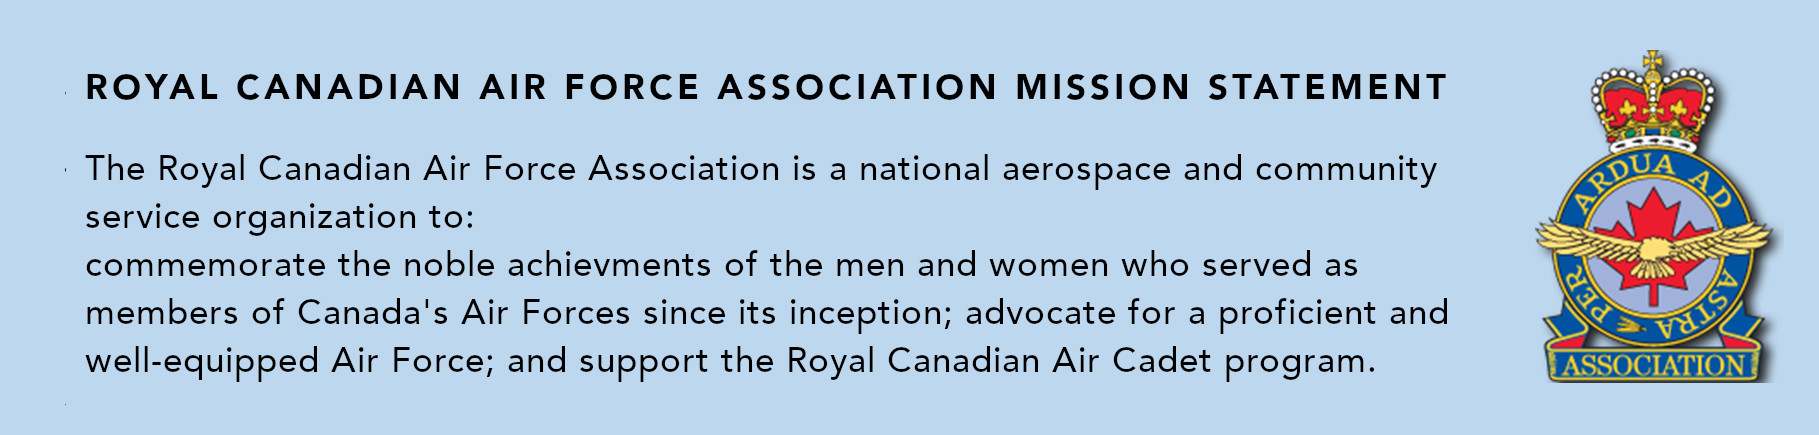 Royal Canadian Air Force Association Mission Statement